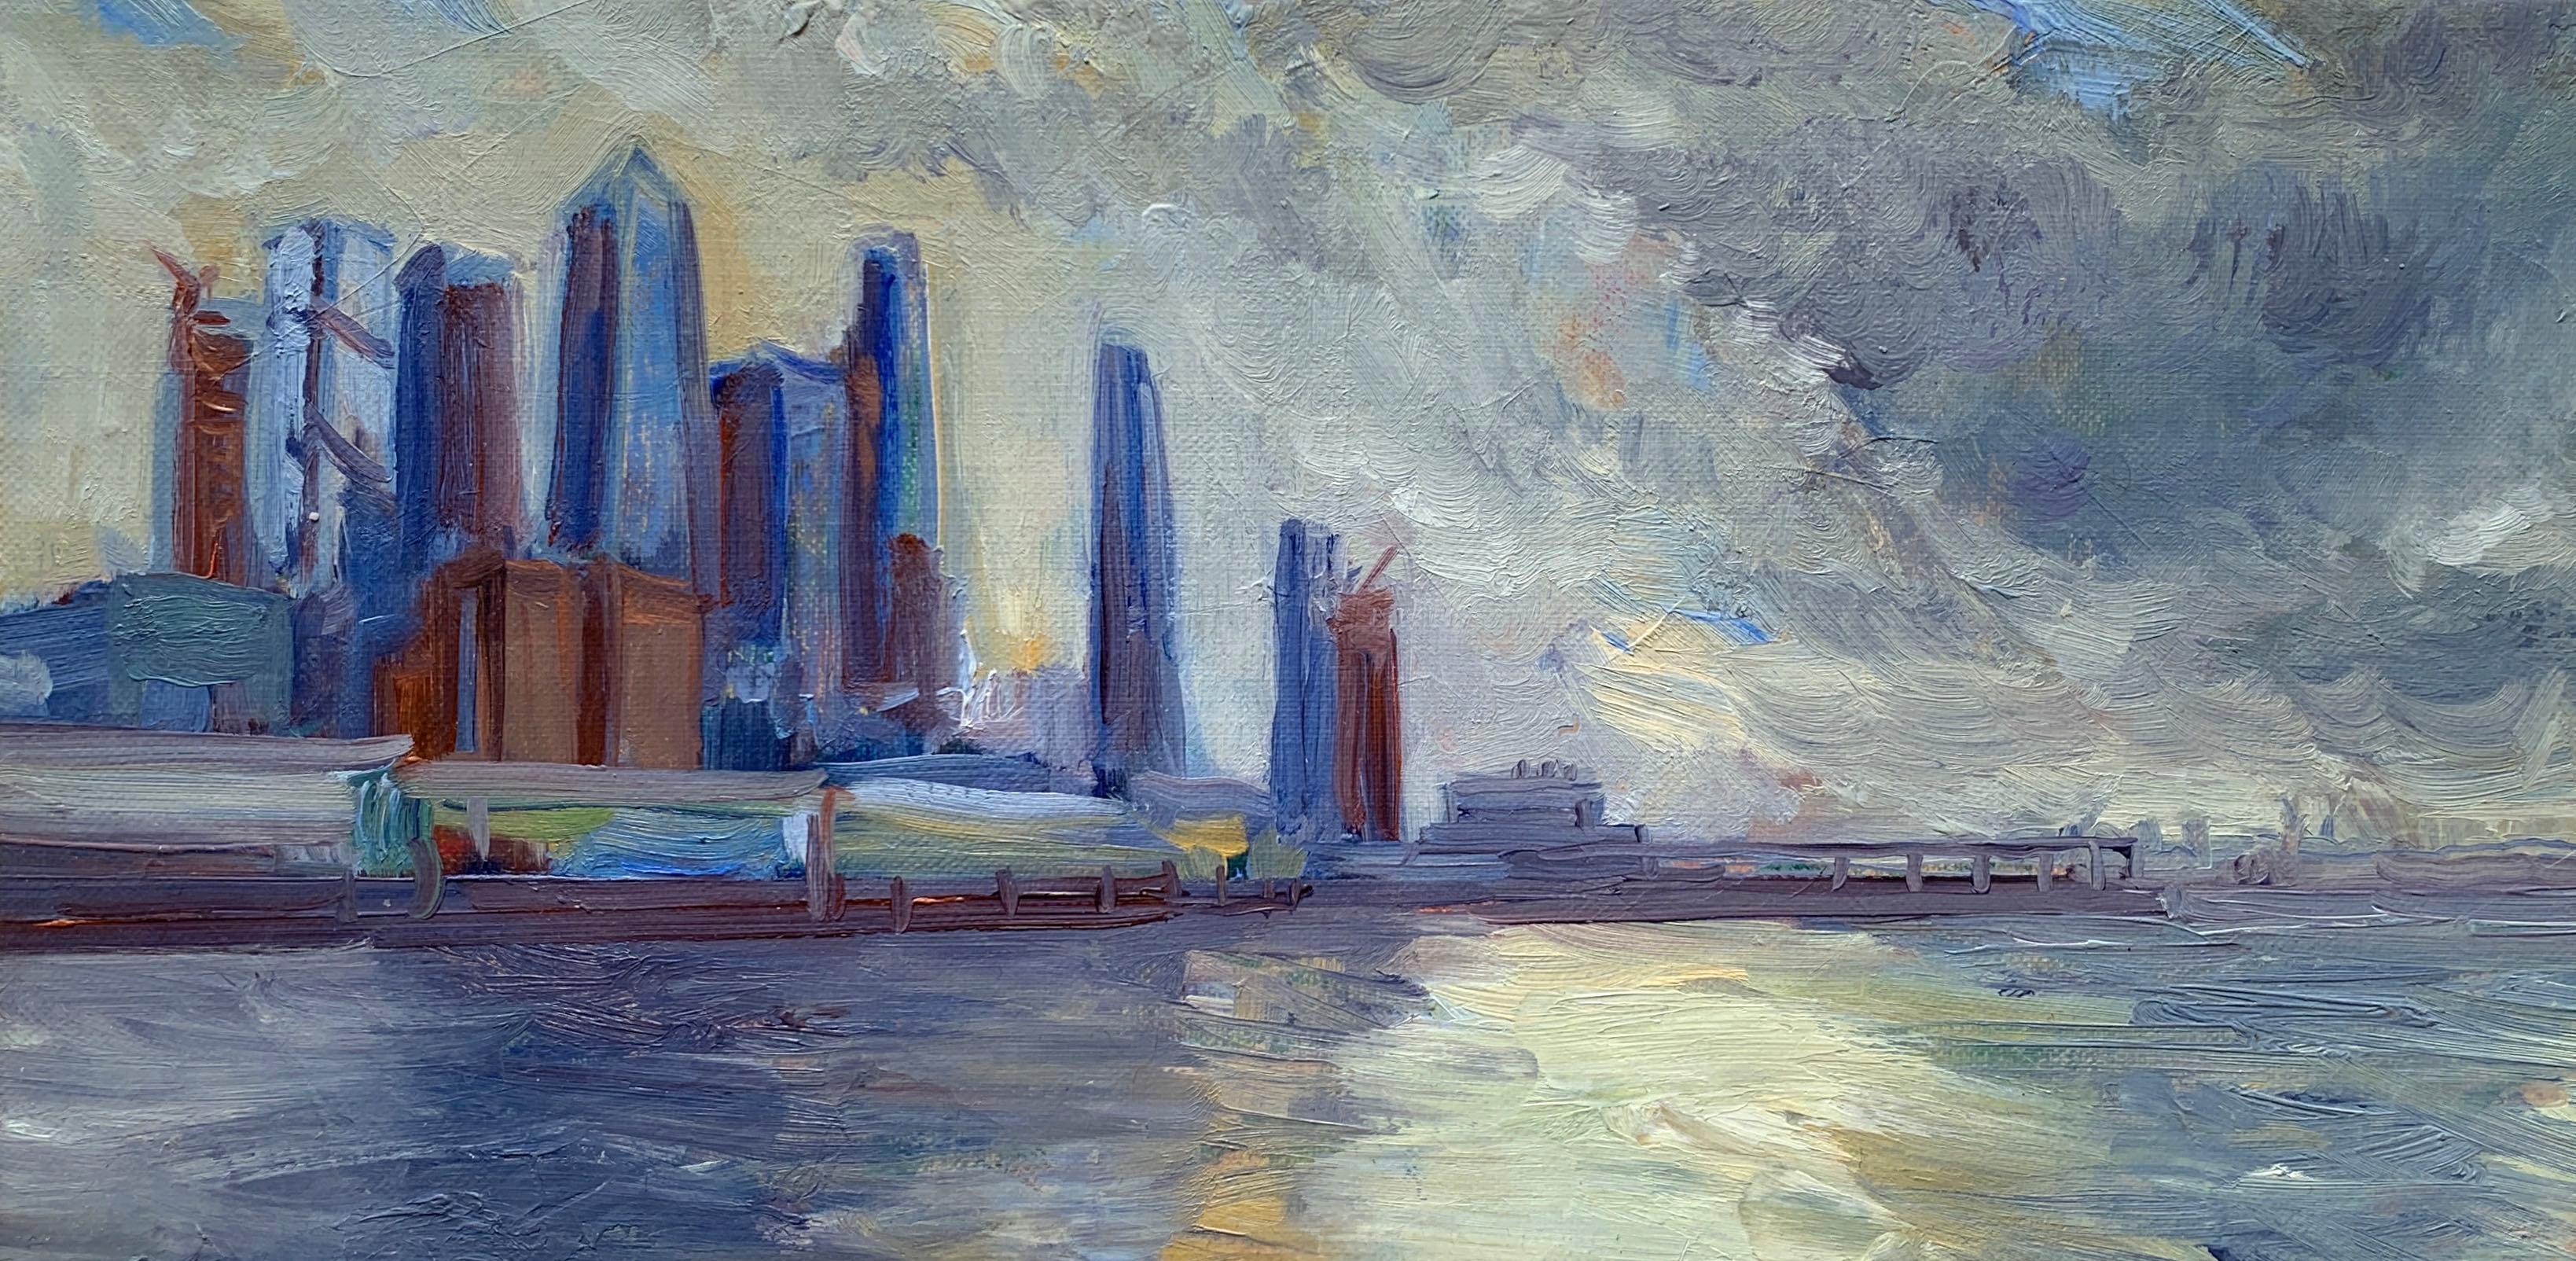 Gwyneth Leech Landscape Painting - Stormy View from Pier 8, Oil on linen, Impressionist skyline painting